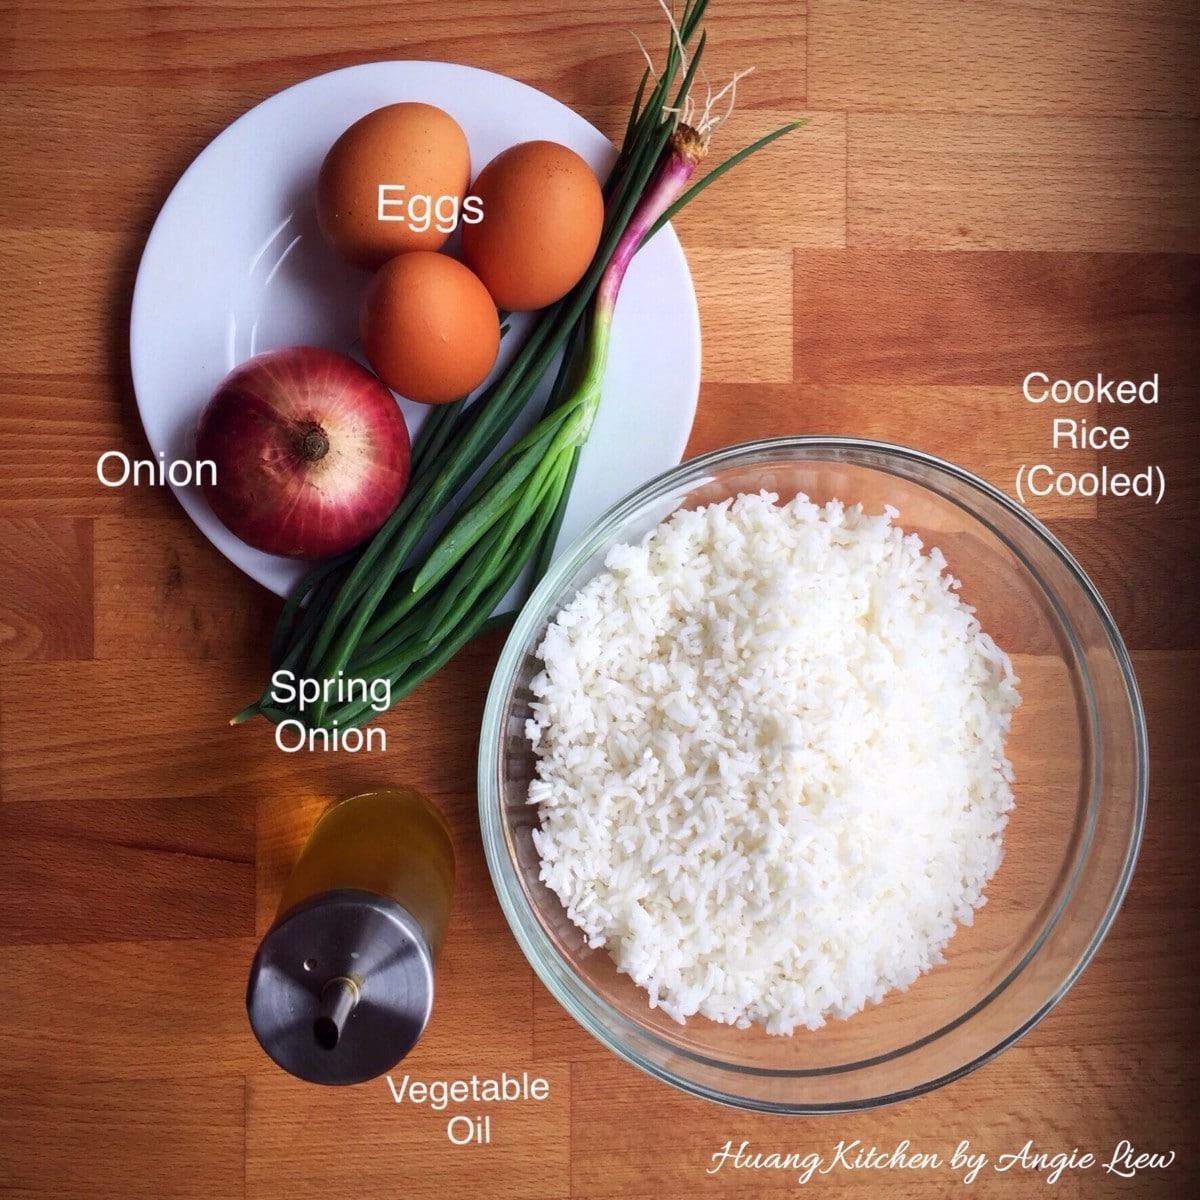 Ingredients for Chinese Egg Fried Rice